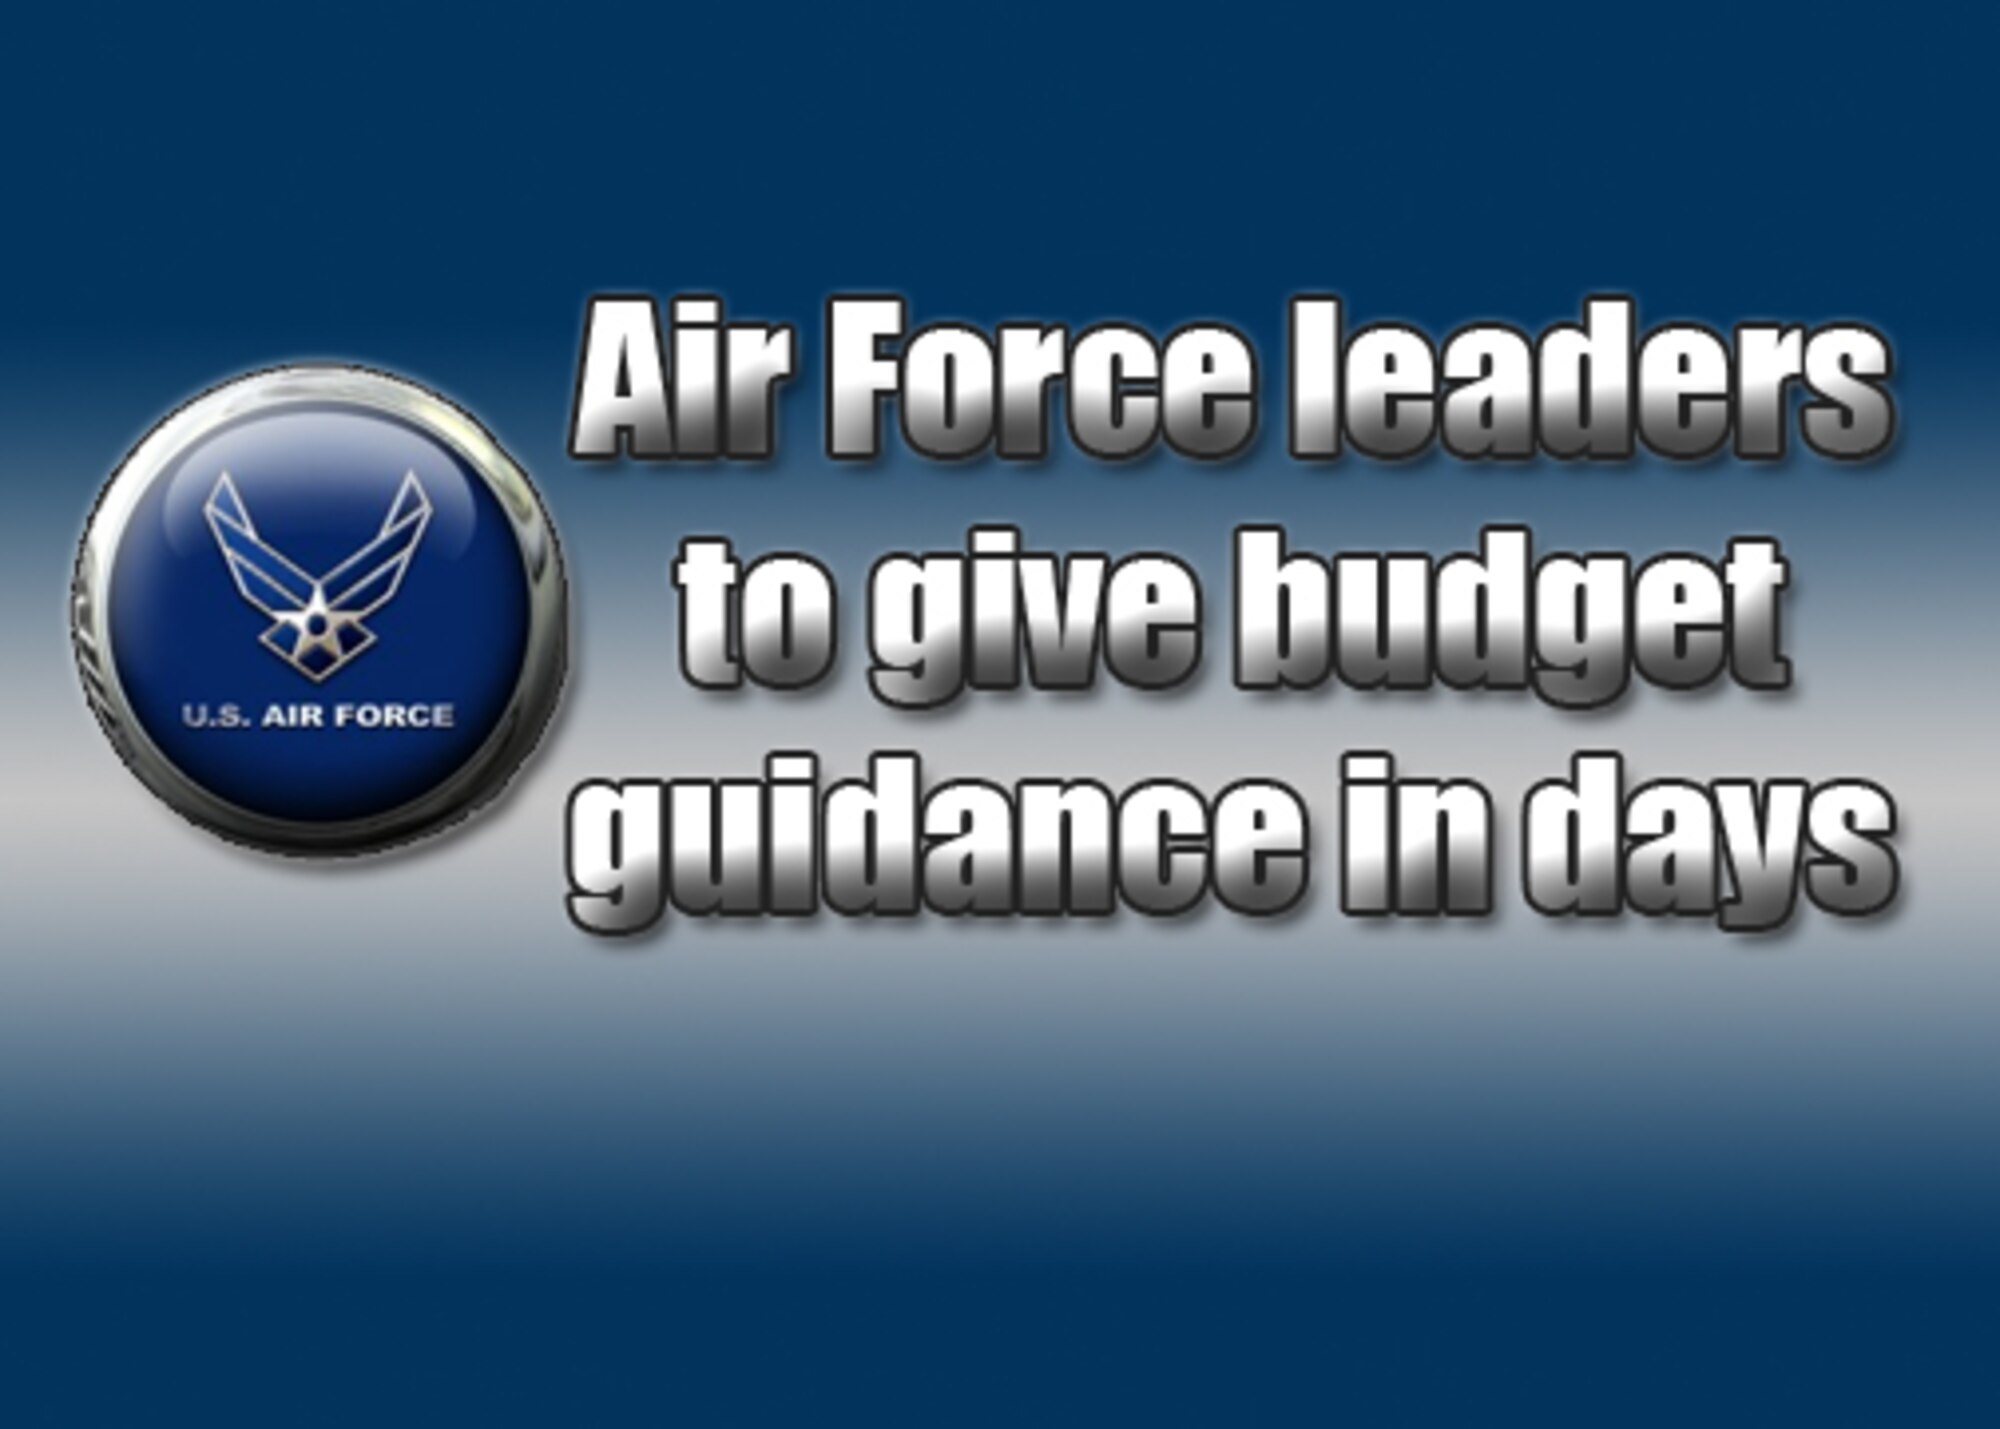 Air Force leaders to give budget guidance in days.